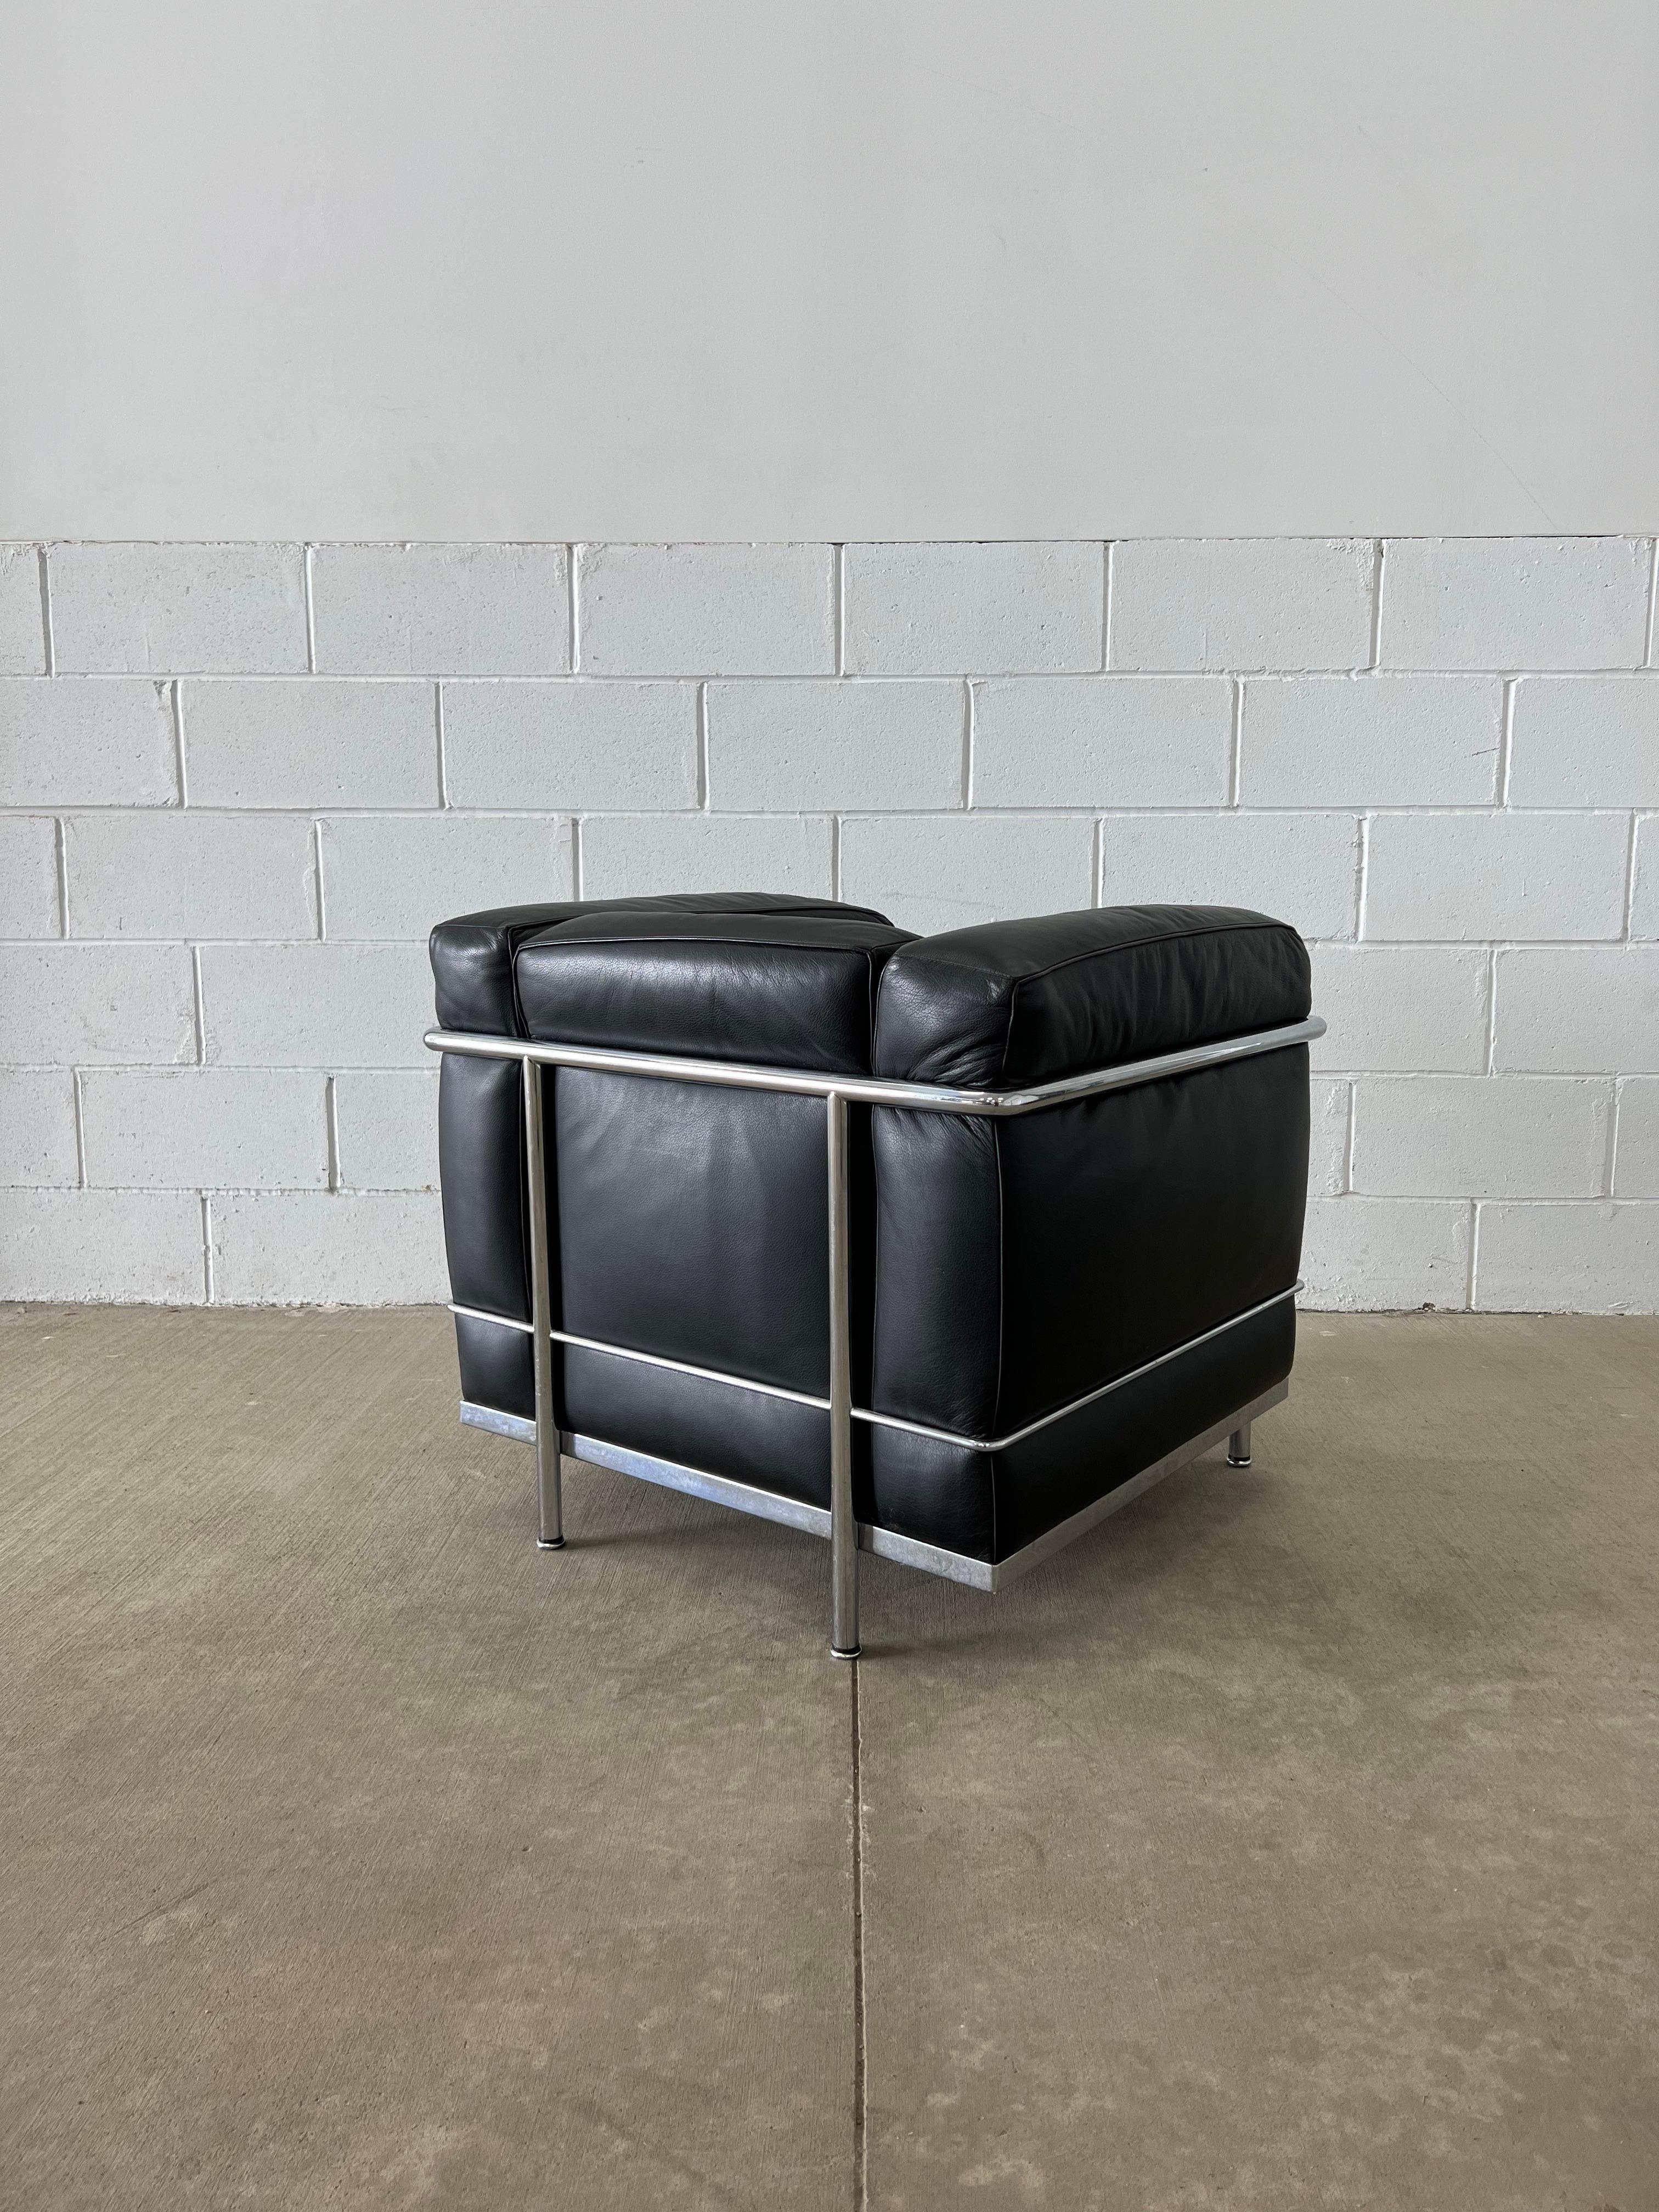 20th Century LC2 by Le Corbusier, Pierre Jeanneret, and Charlotte Perriand for Cassina